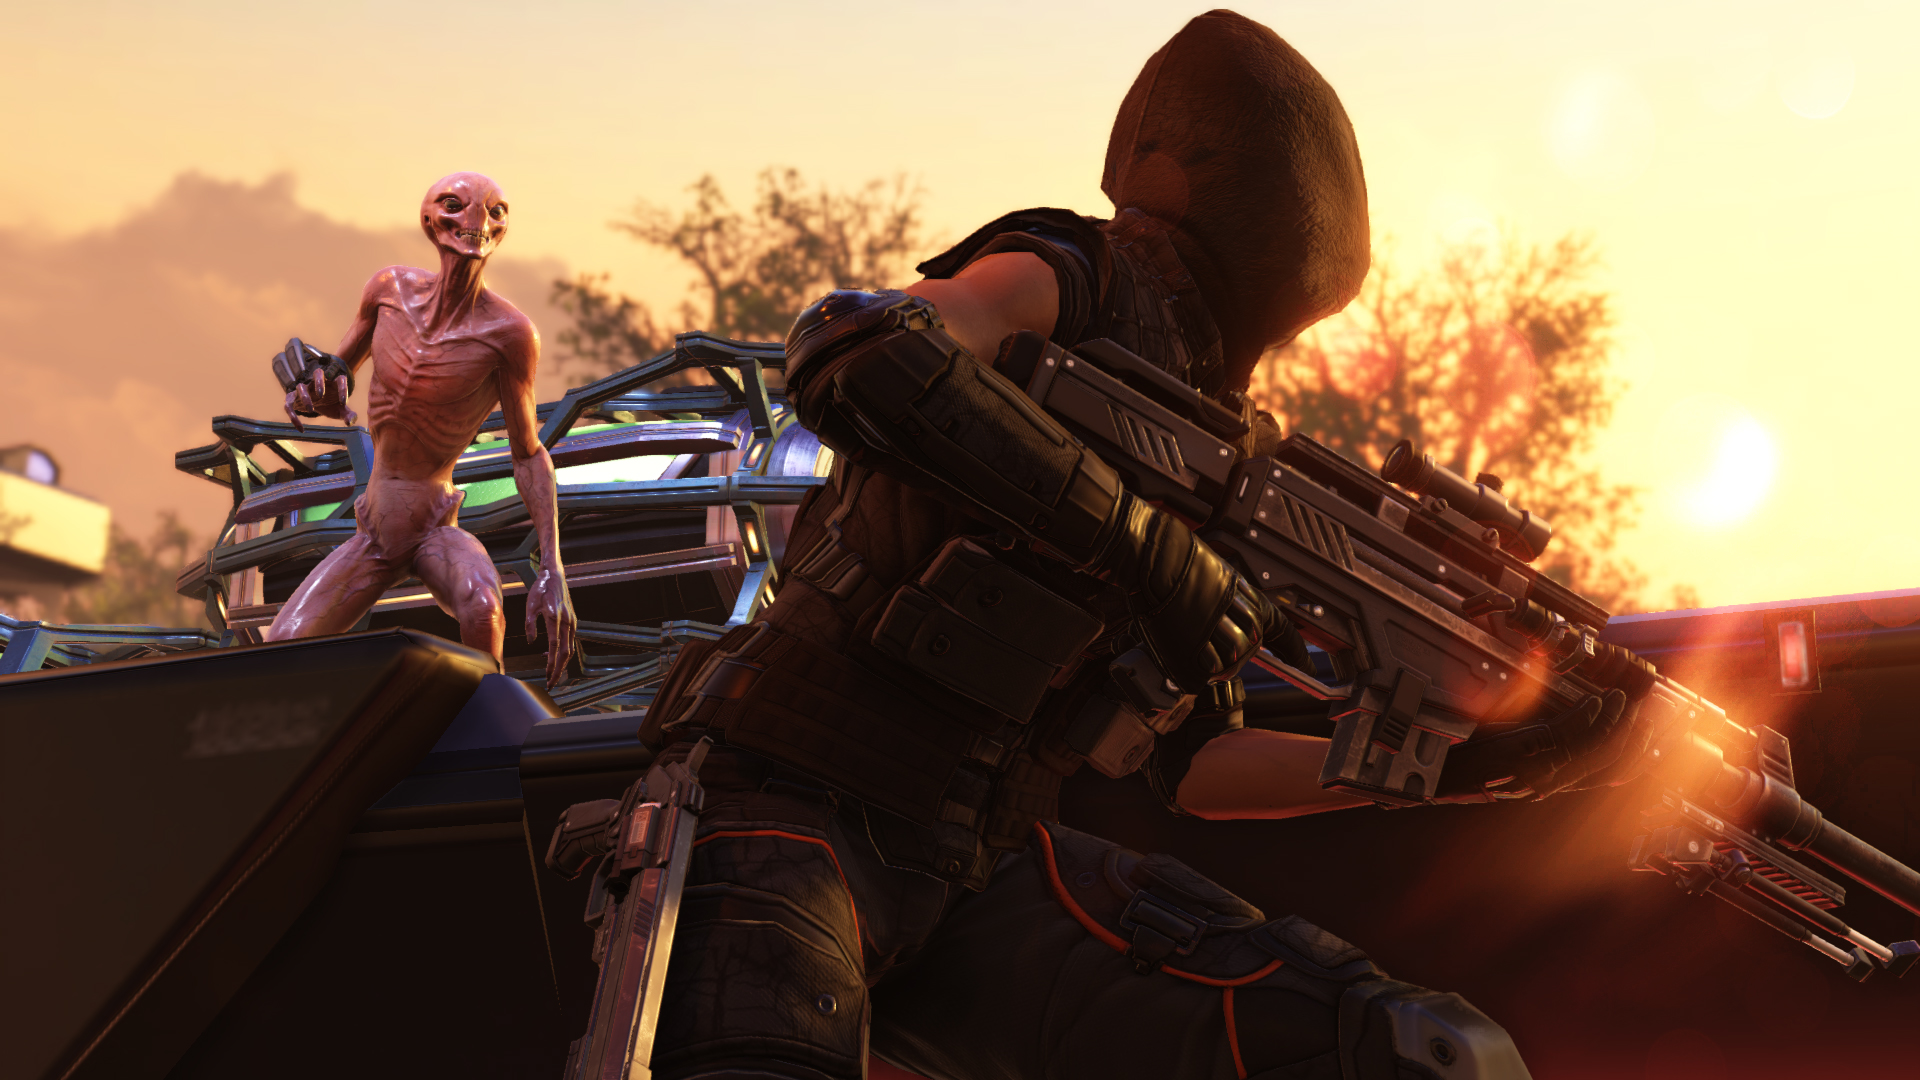 XCOM 2 is more of the same, just bigger and better